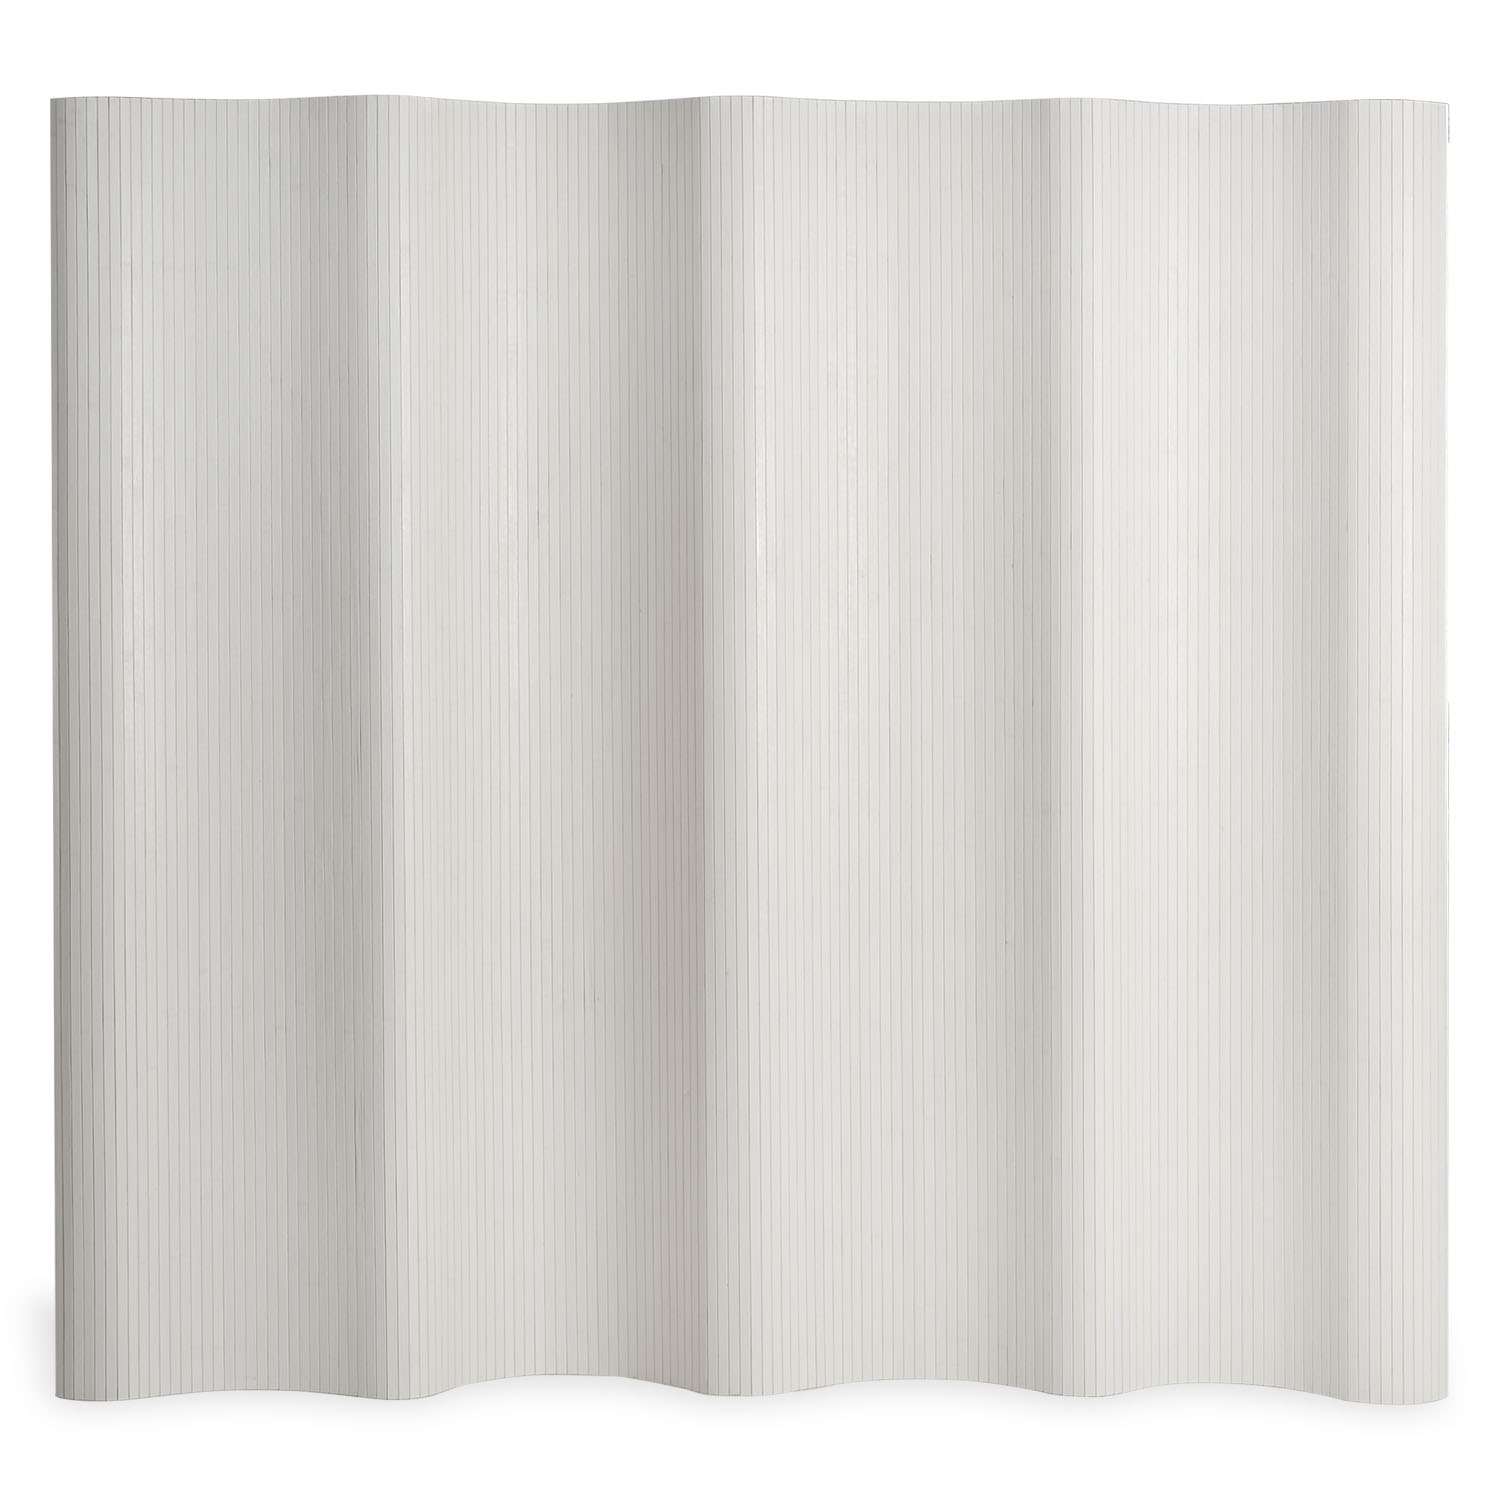 Paravent Room Divider Bamboo 200 x 250 cm Privacy Screen Spanish Wall White Washed